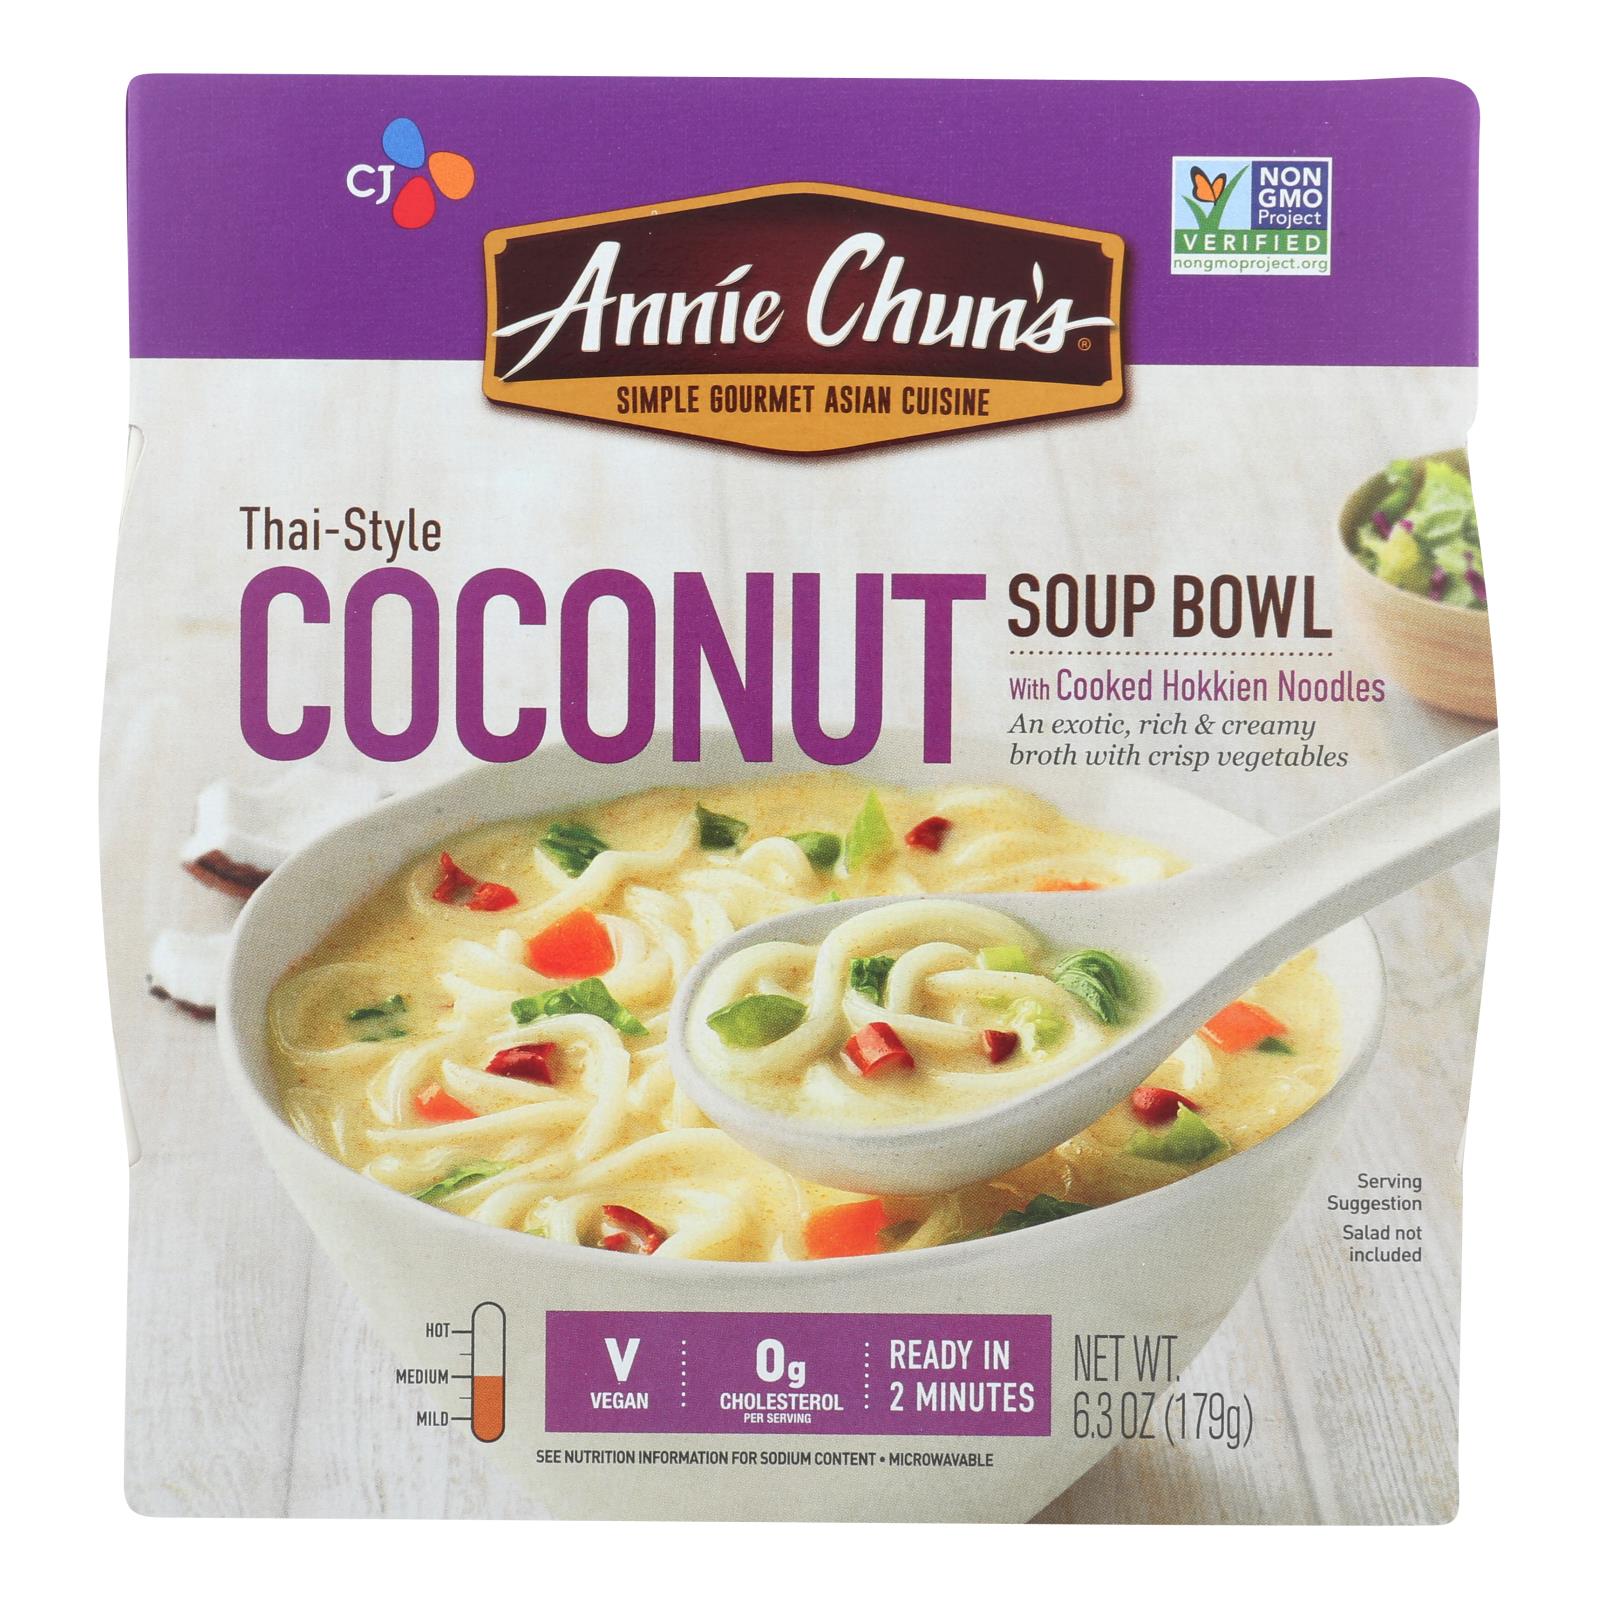 Annie Chun's Thai-Style Coconut Soup Bowl With Cooked Hokkien Noodles - 6개 묶음상품 - 6.3 OZ